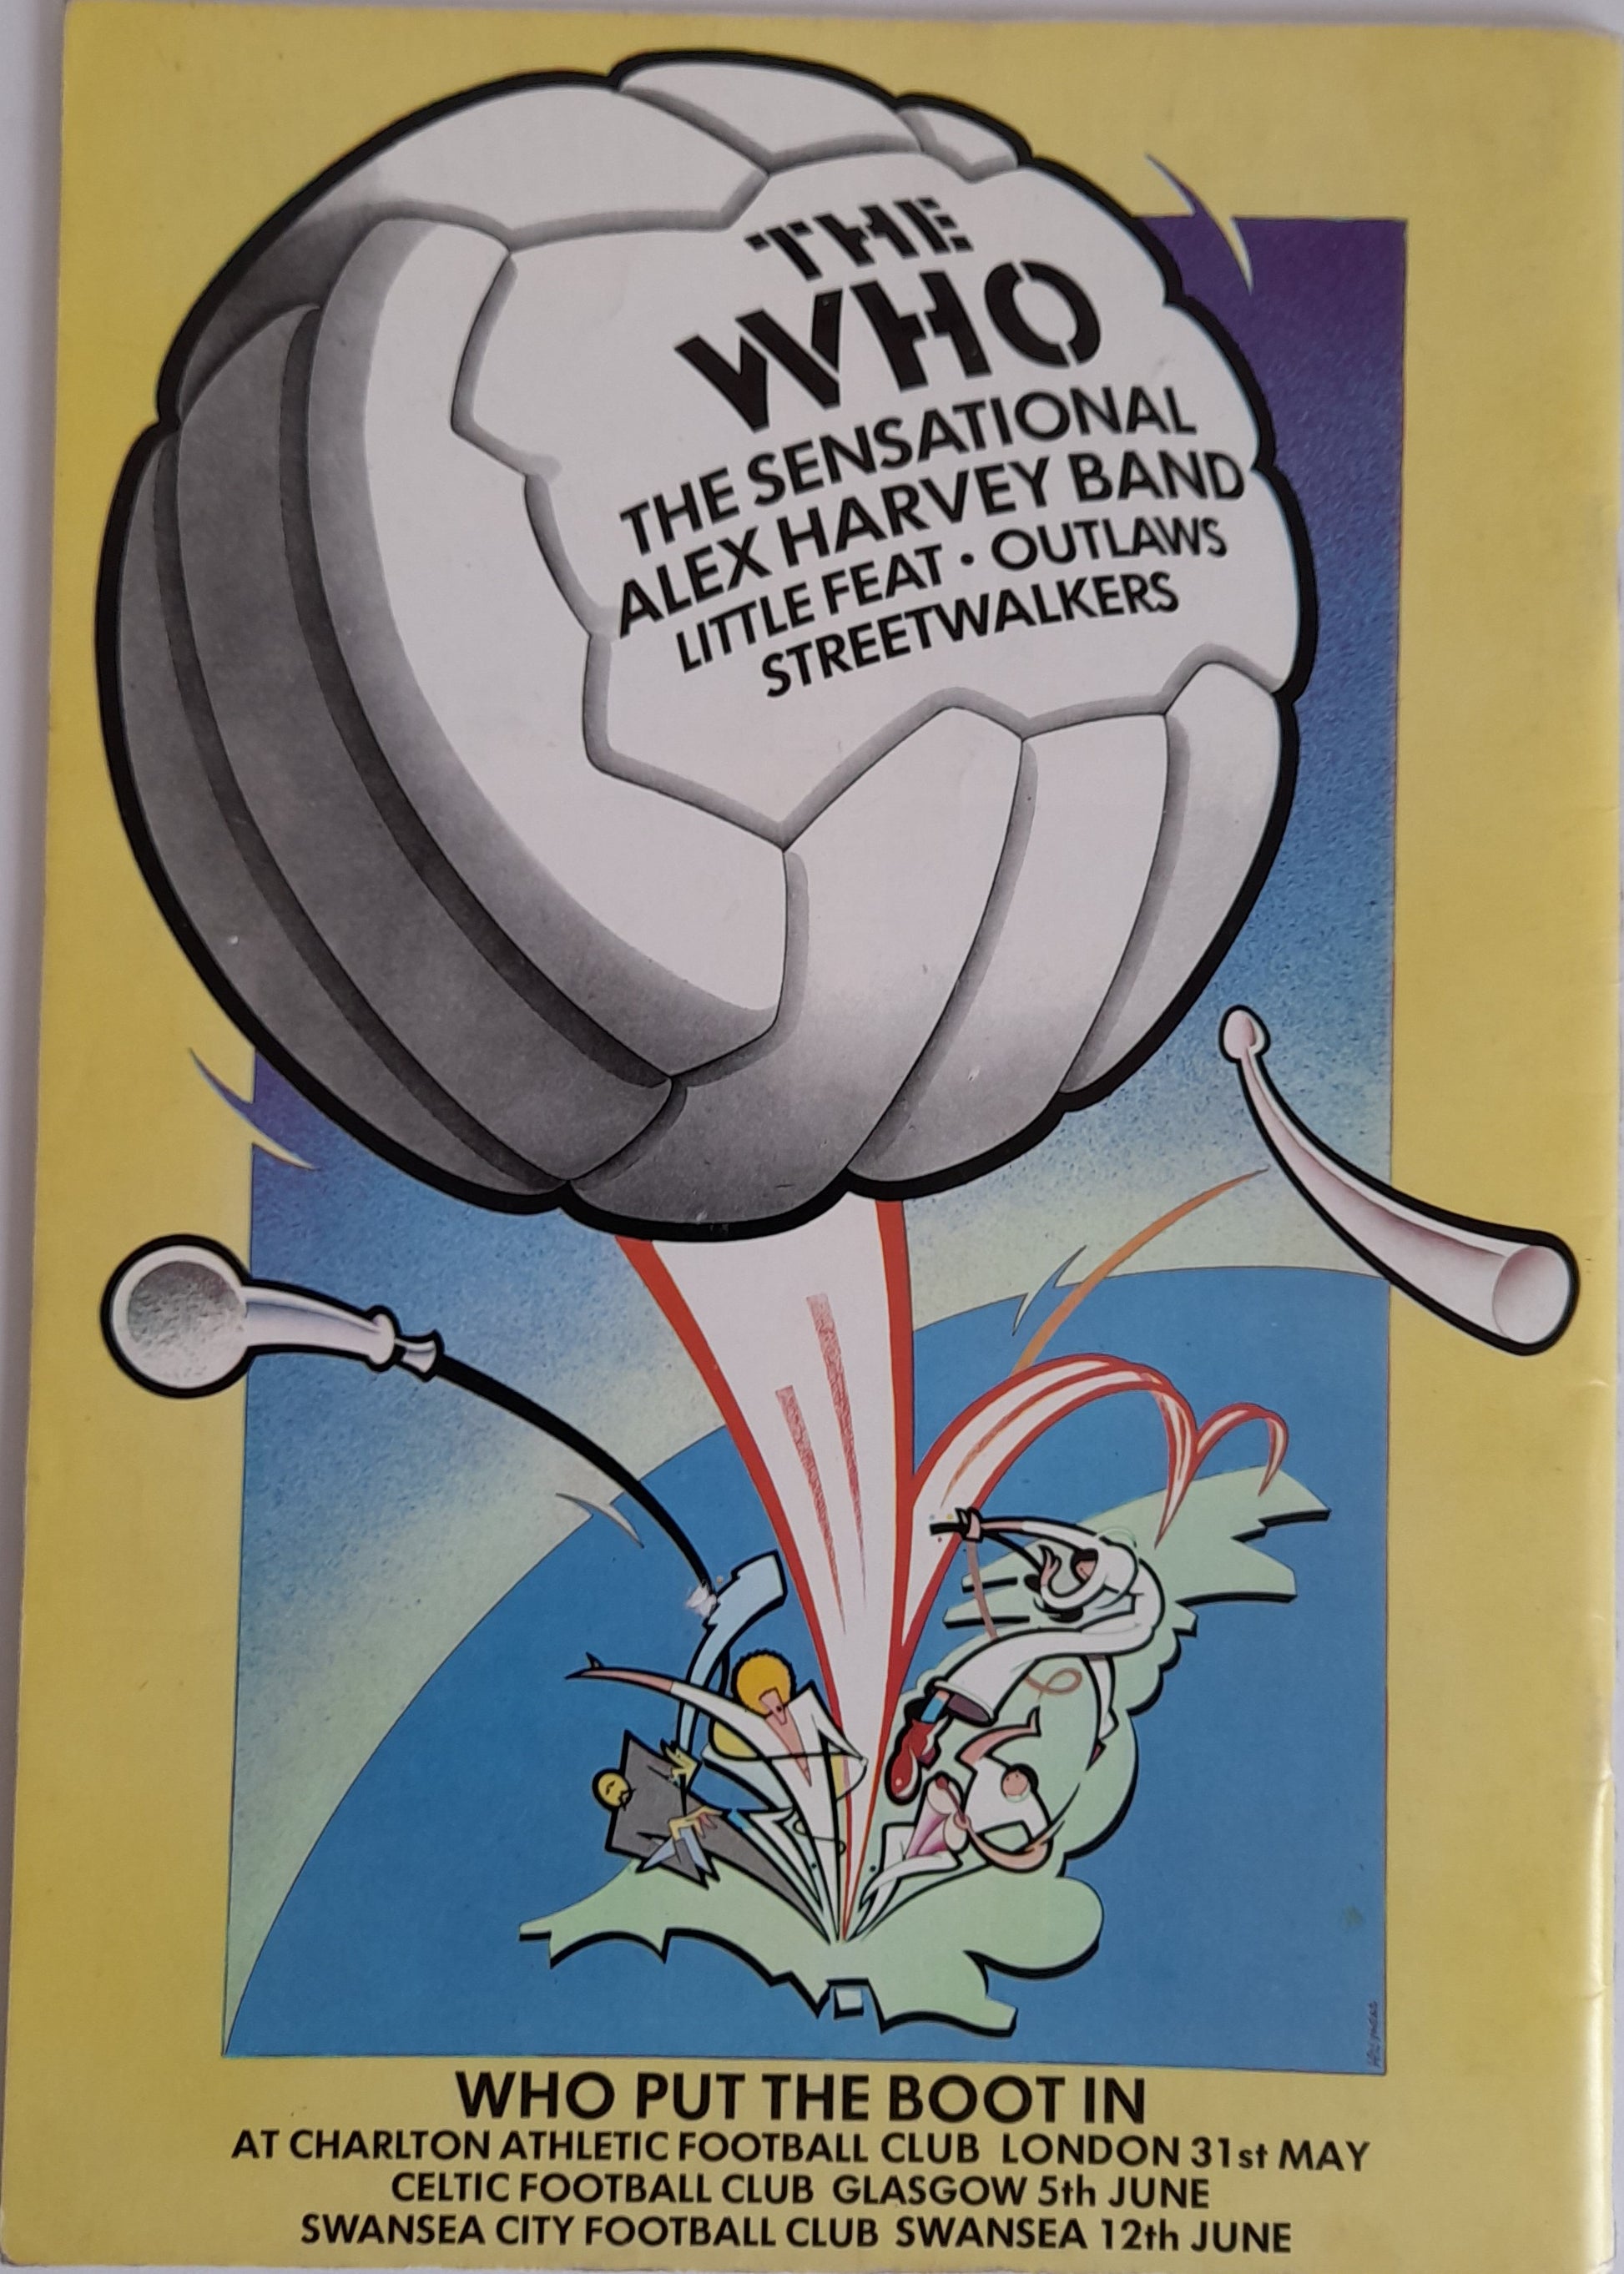 The Who, The Sensational Alex Harvey Band - Bellboy Magazine 1976 The Official Programme Volume 1 number 1 High number